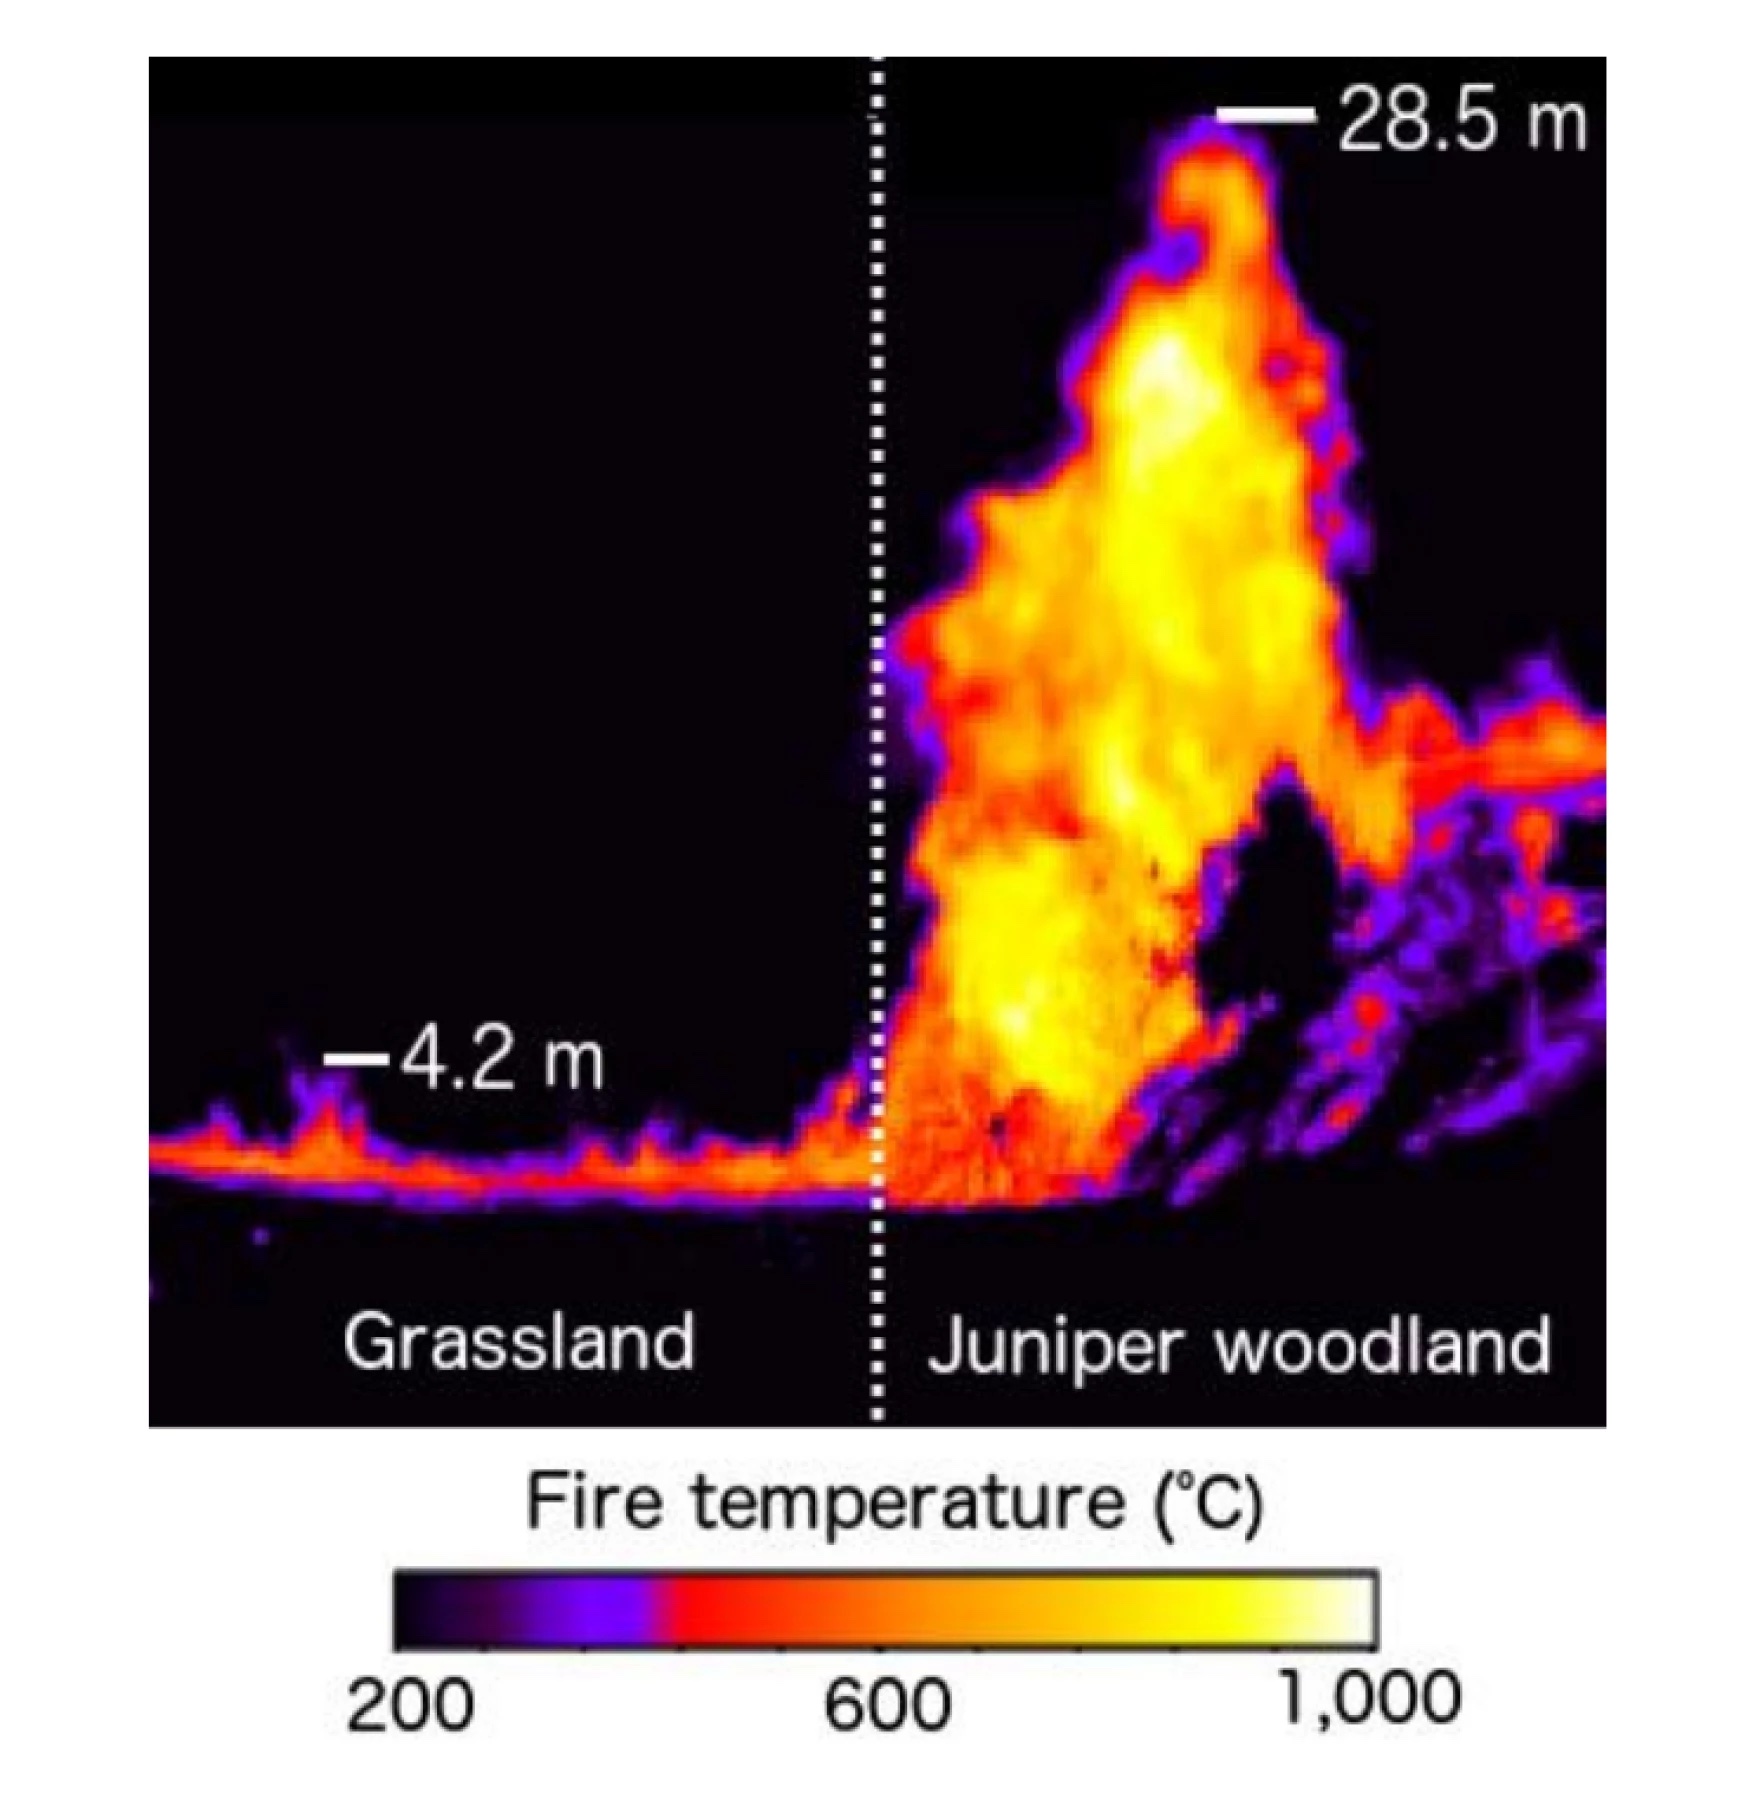 A chart showing how fire temperature over juniper woodlands are much hotter than over grass.